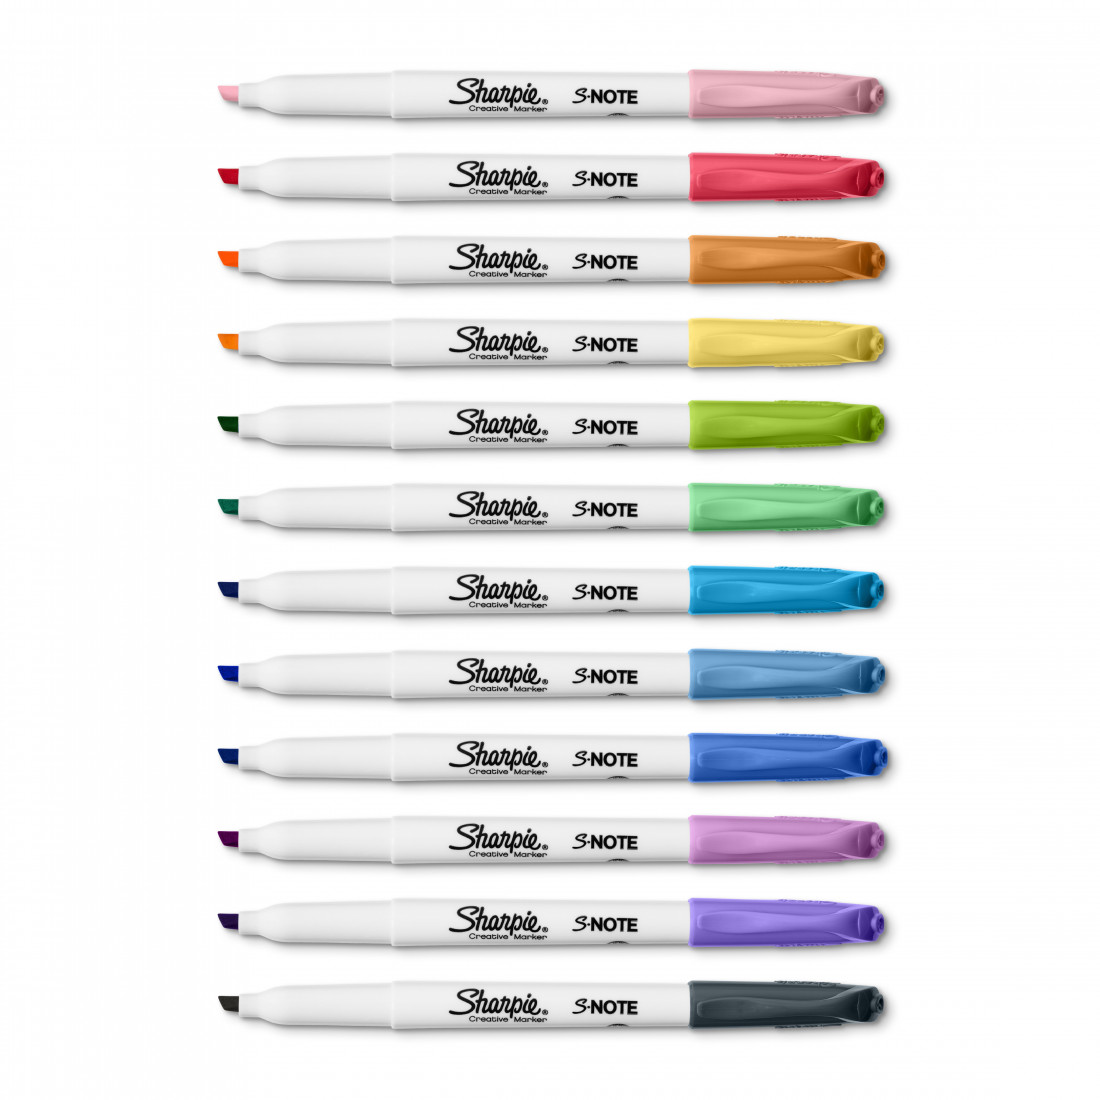 Sharpie S.NOTE creative markers 12 pcs